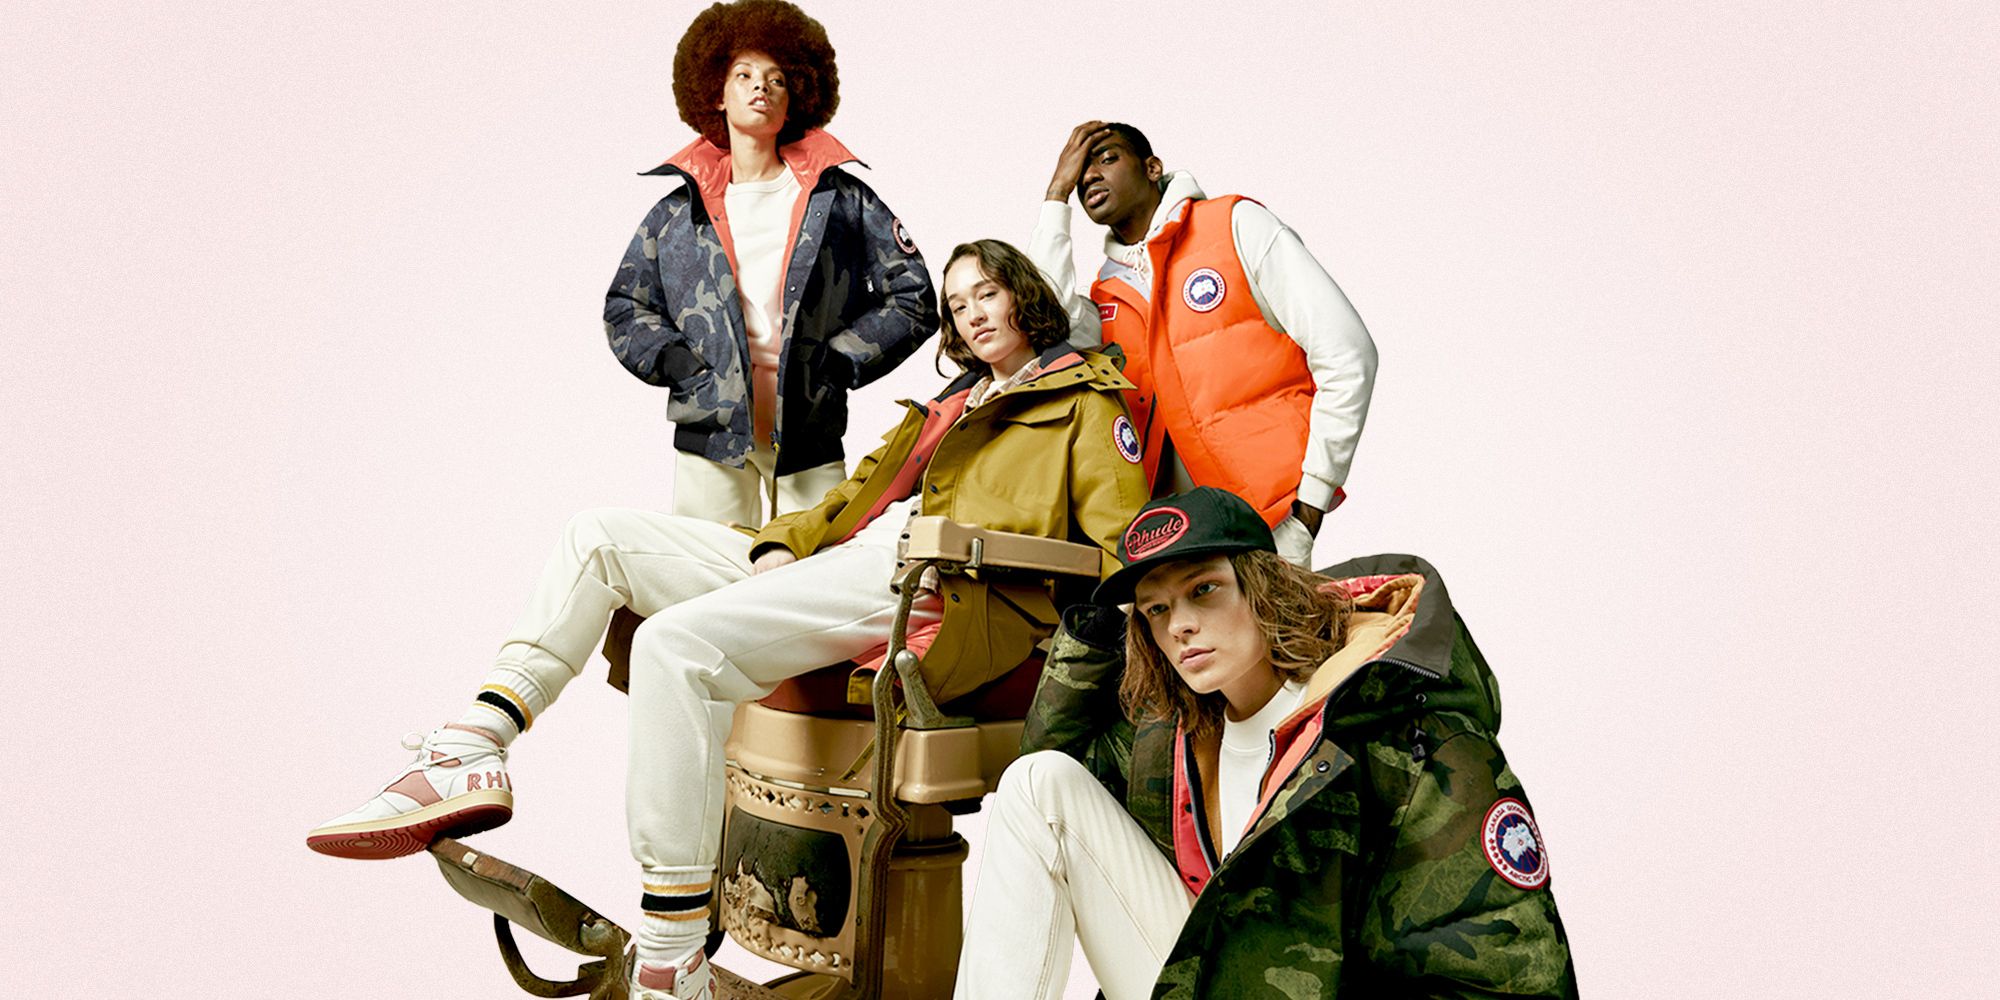 Canada Goose and Salehe Bembury Designs Capsule Collection for NBA All-Star  2022